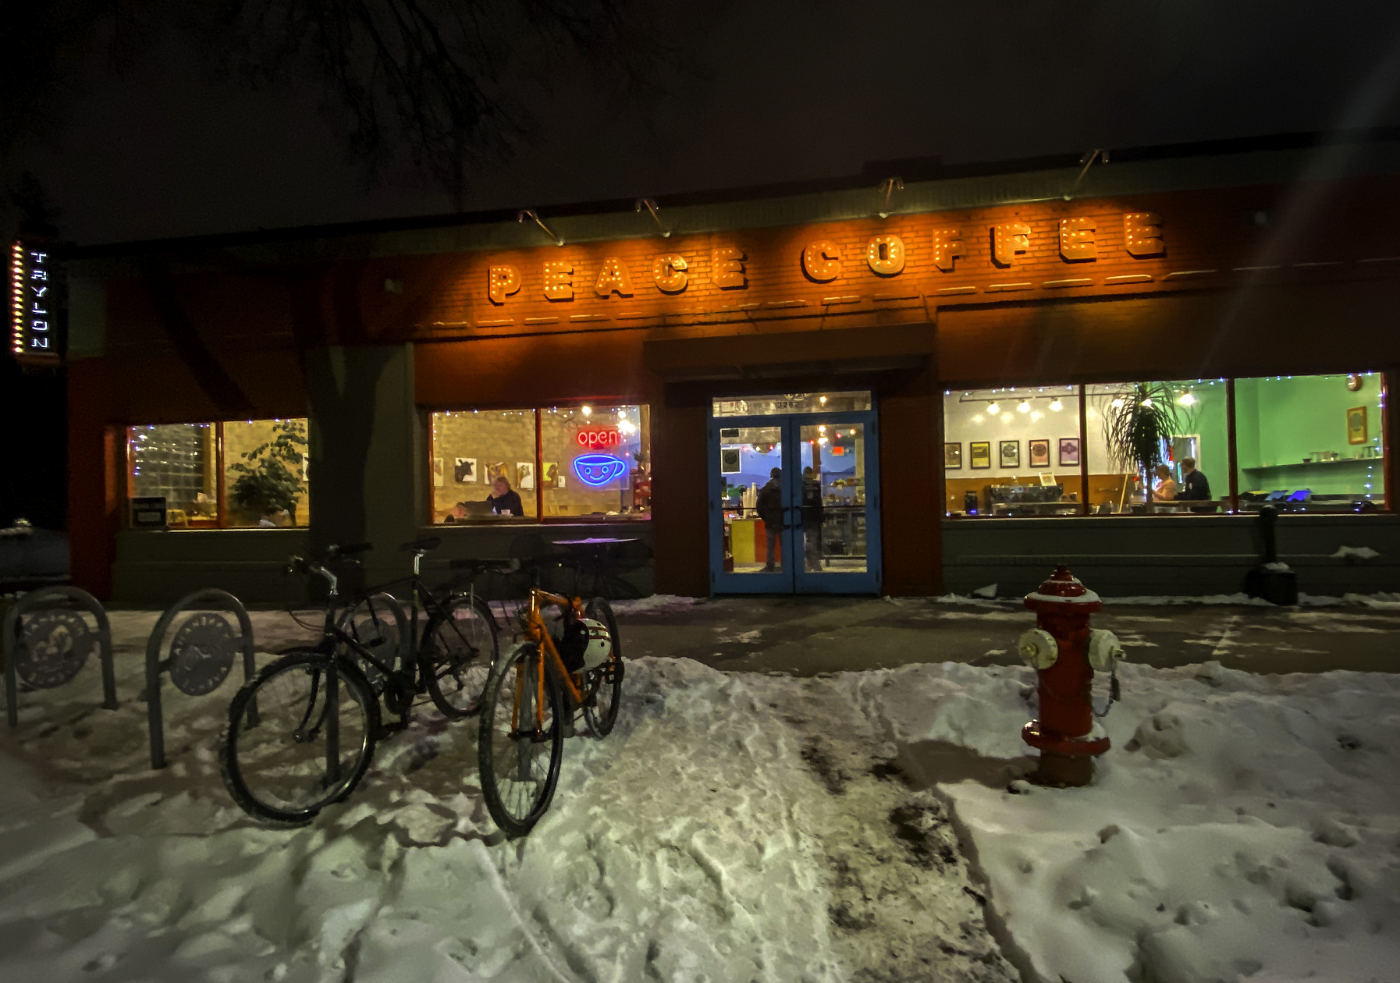 Night scene with snowy street, parked bicycles, and brightly colored storefront windows with yellow-orange overhead sign reading "peace coffee"